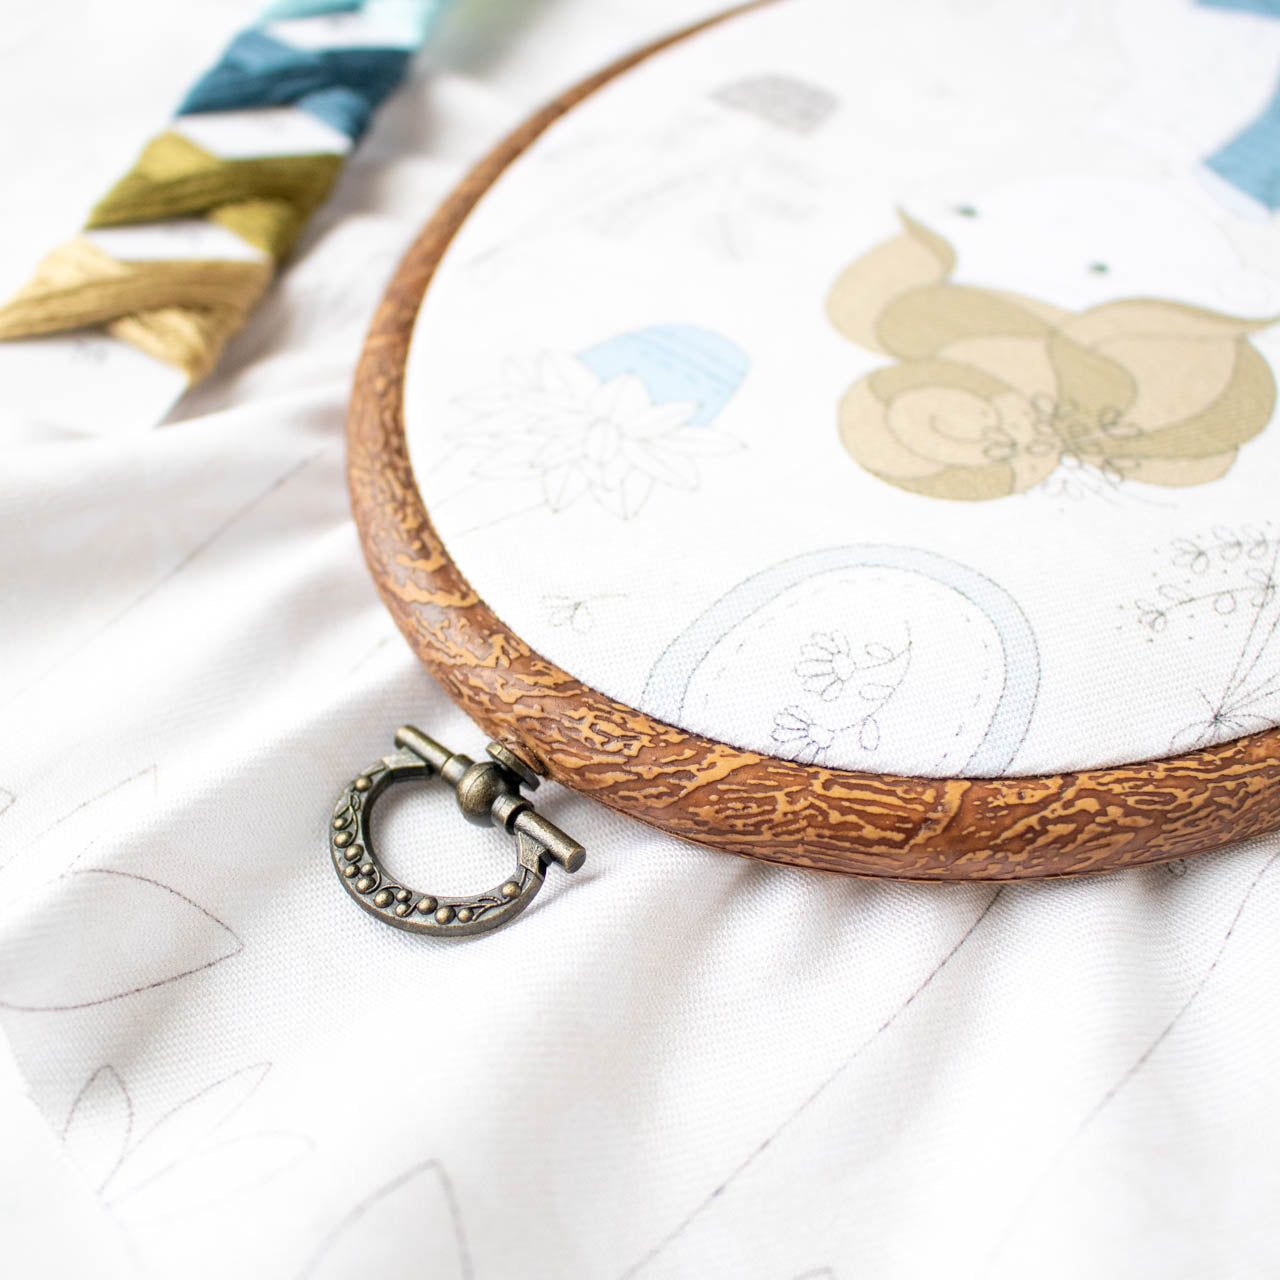 Premium Quality, Plastic Oval Embroidery Hoop with Imitated Wood Look  Display Frame Look (Small)